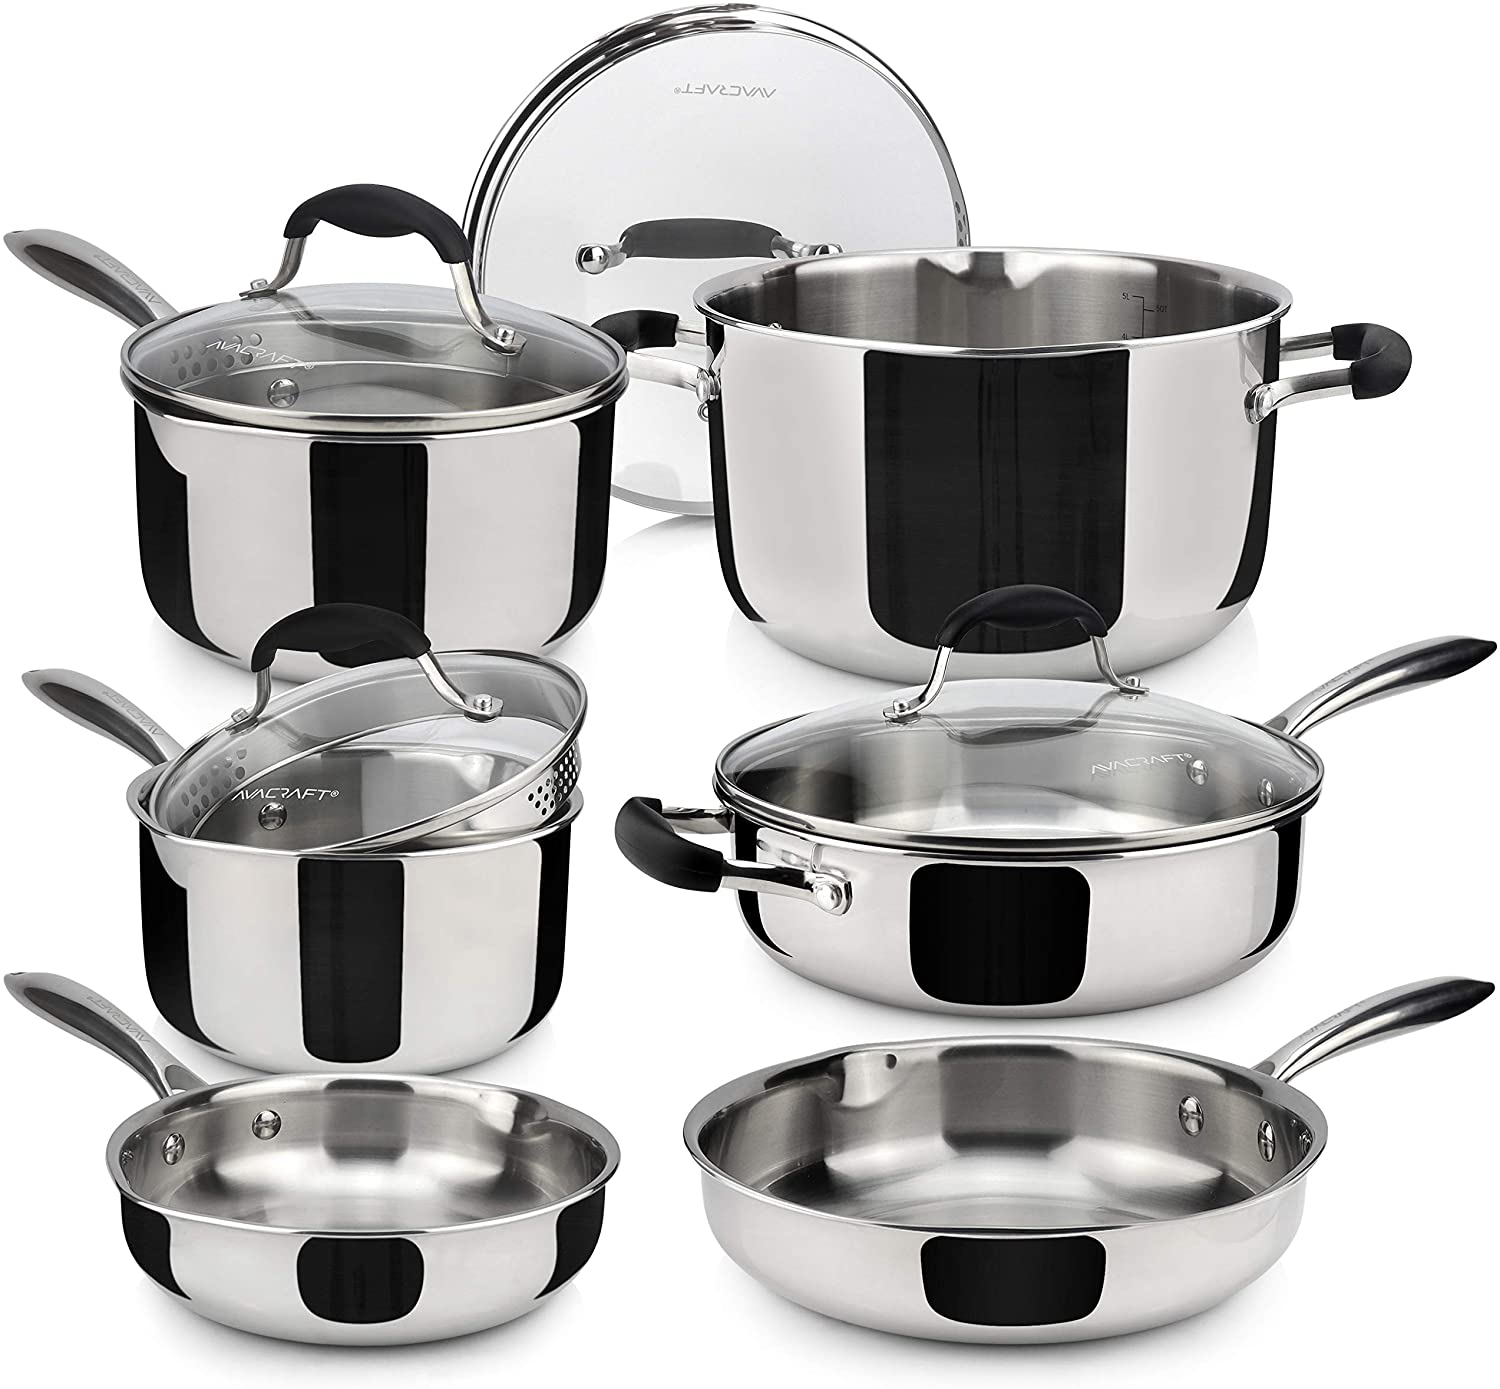 AVACRAFT 18/10 Stainless Steel Premium Multiclad Pots and Pans Set, 10-Piece Cookware Set